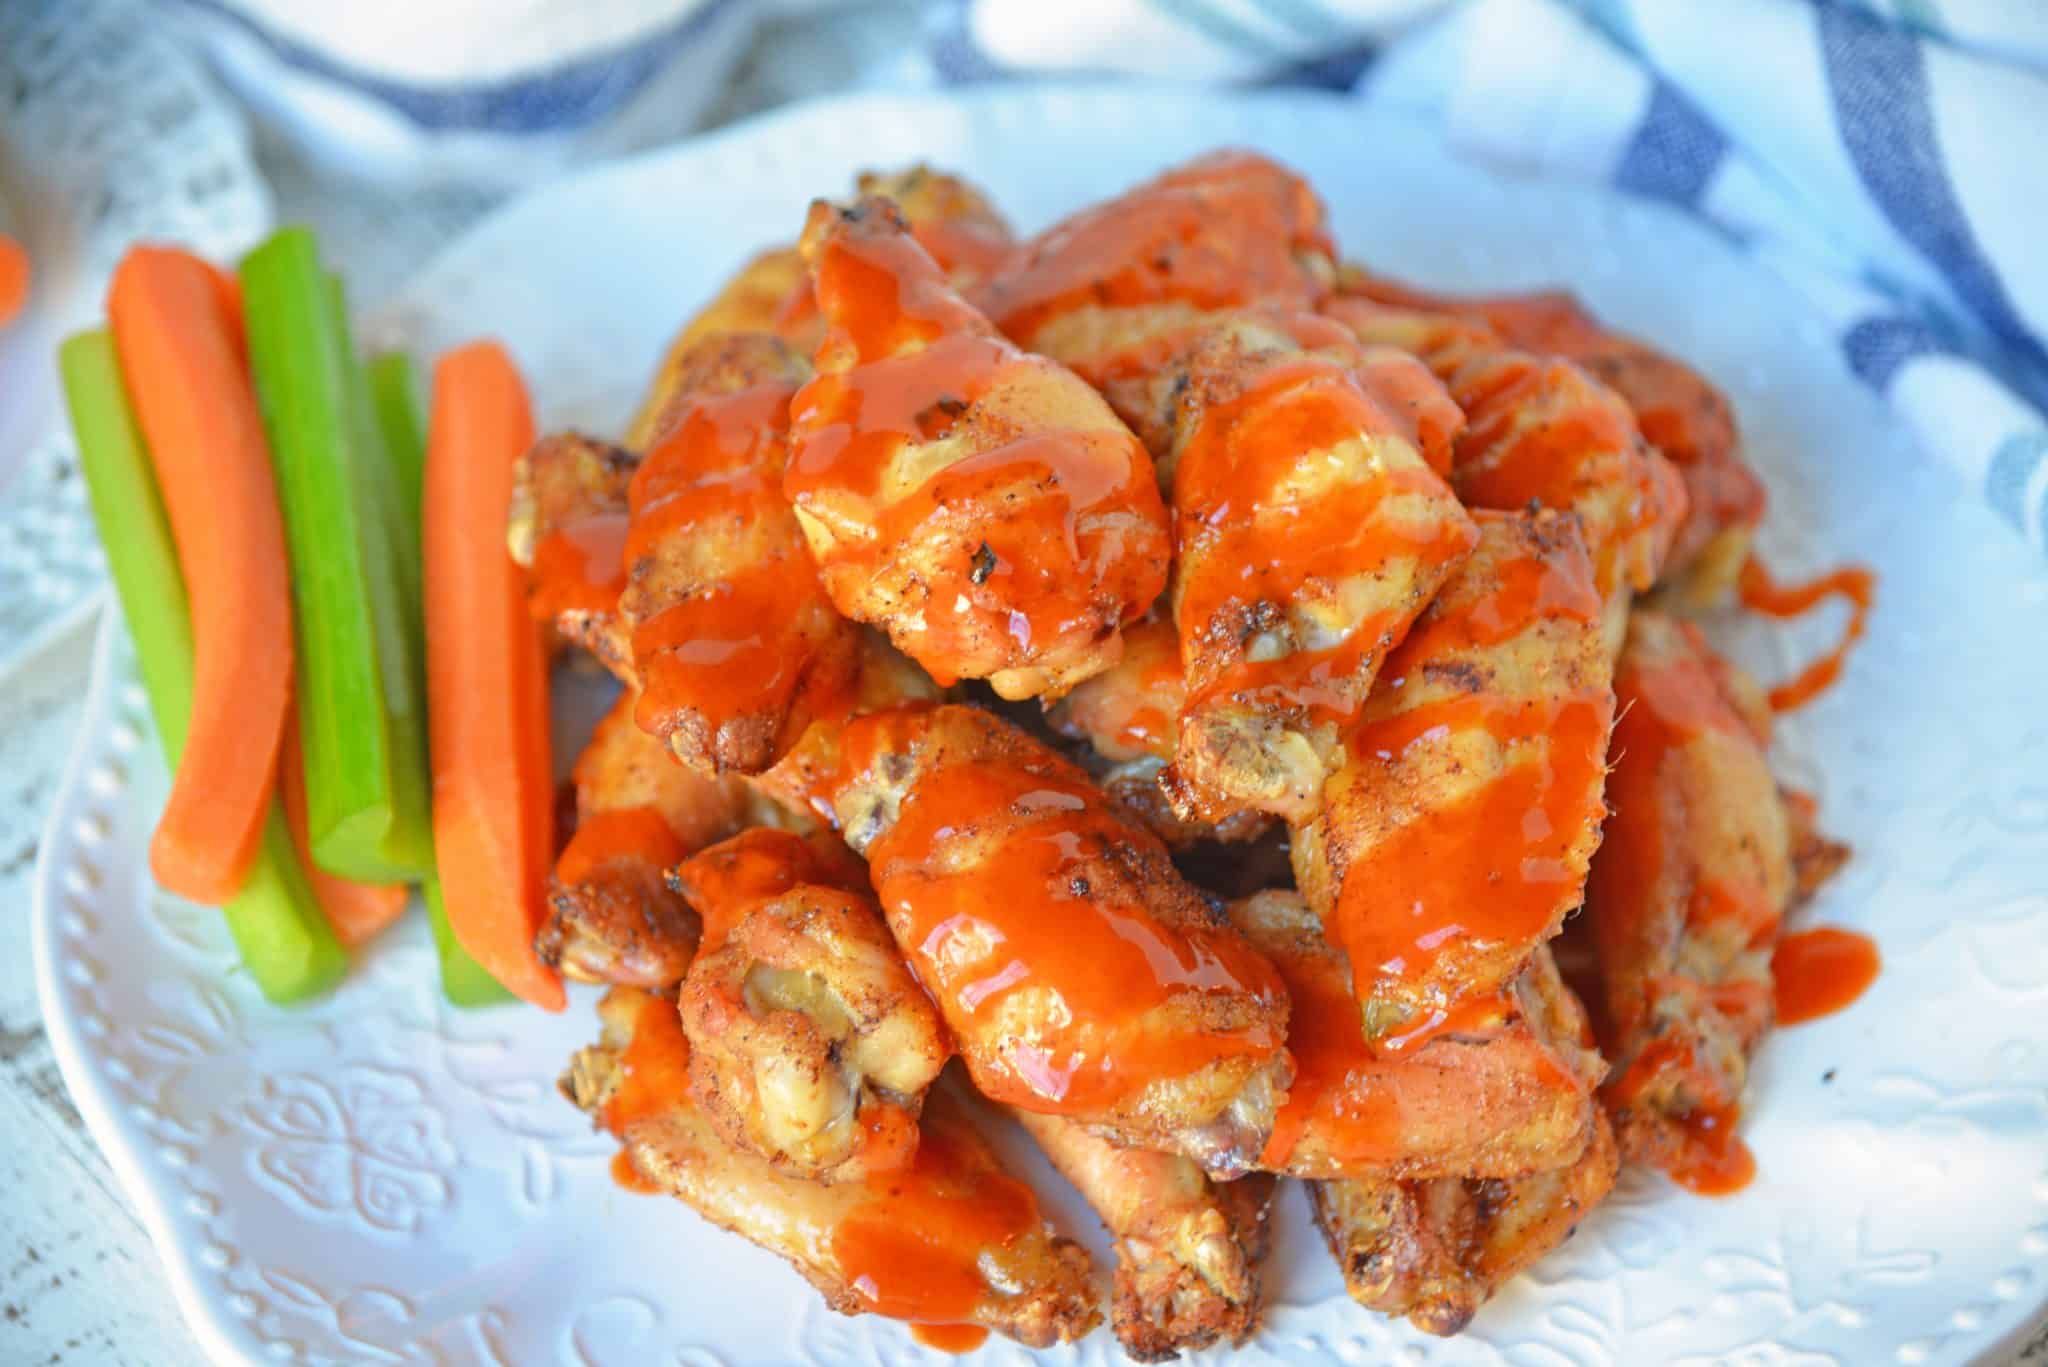 Plate of buffalo wings with carrots and celery 